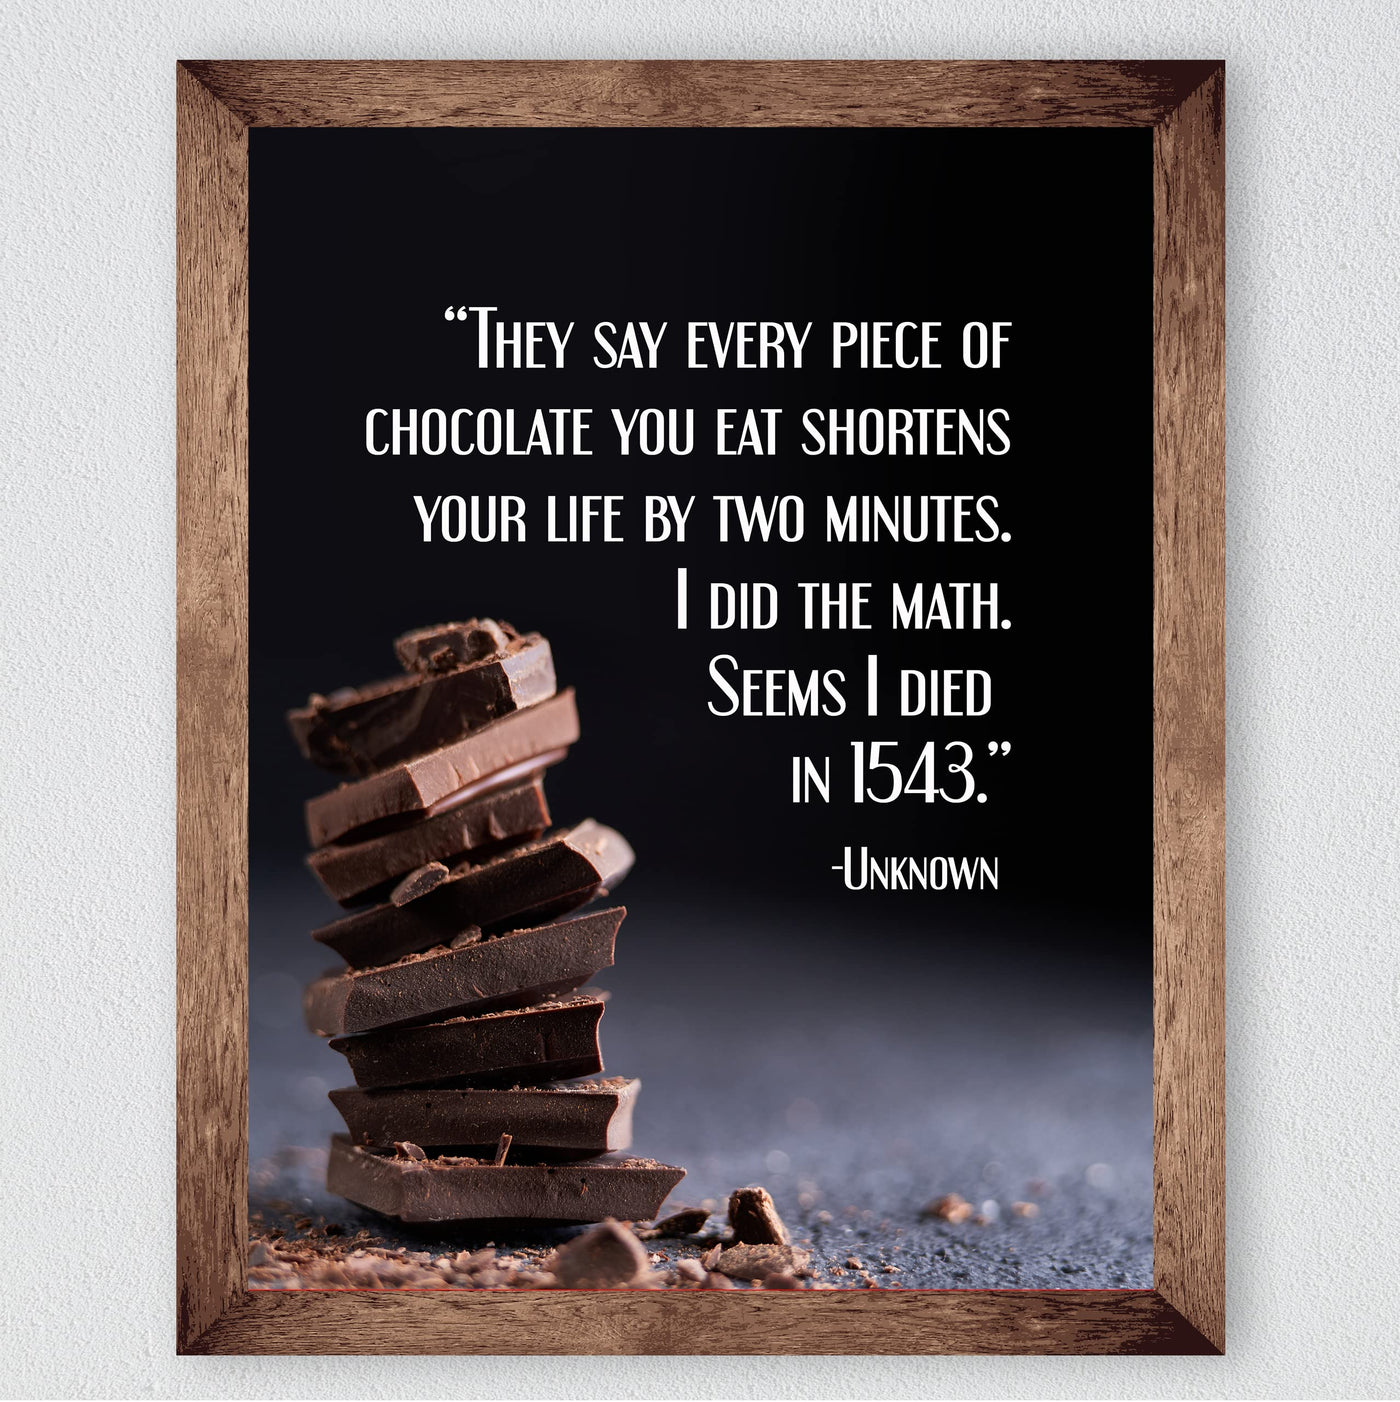 Every Piece Of Chocolate Shortens Life By 2 Minutes-Died in 1543- Funny Wall Art Sign - 8 x 10" Humorous Wall Print-Ready to Frame. Home-Kitchen-Office-Cafe Decor. Fun Gift for Chocolate Lovers!